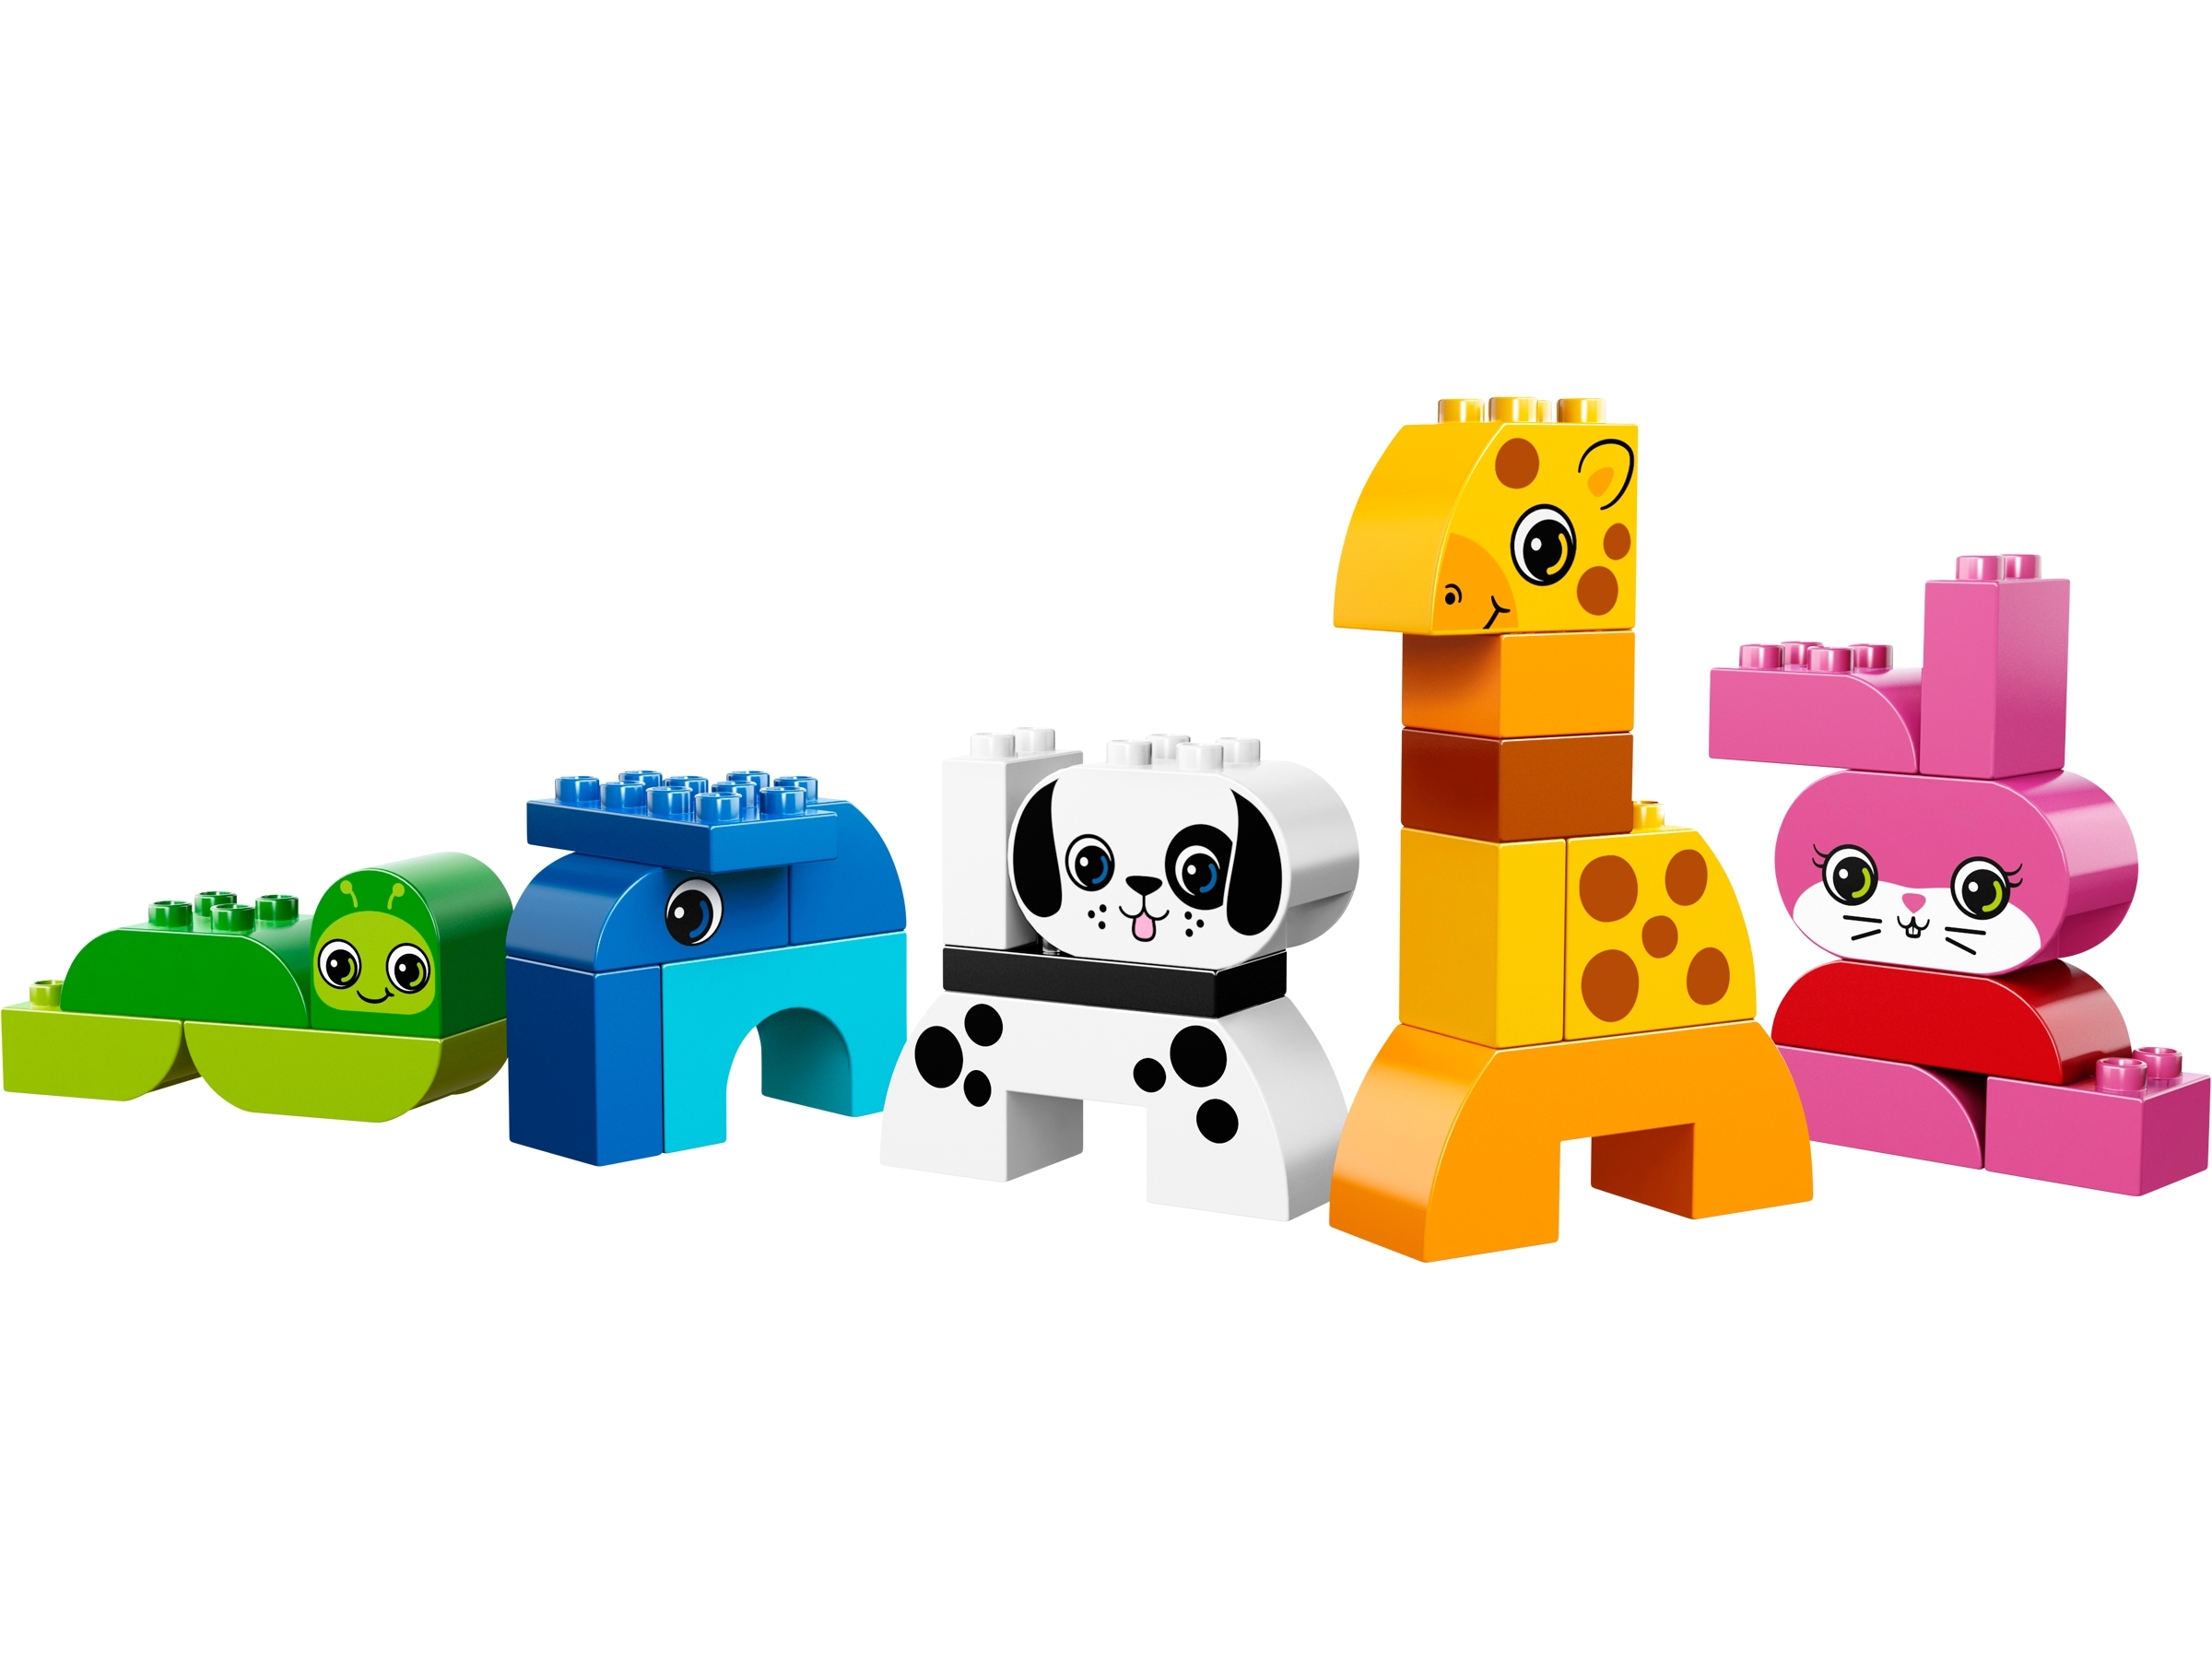 Creative Animals 10573 | DUPLO® | Buy online at the Official LEGO® Shop US